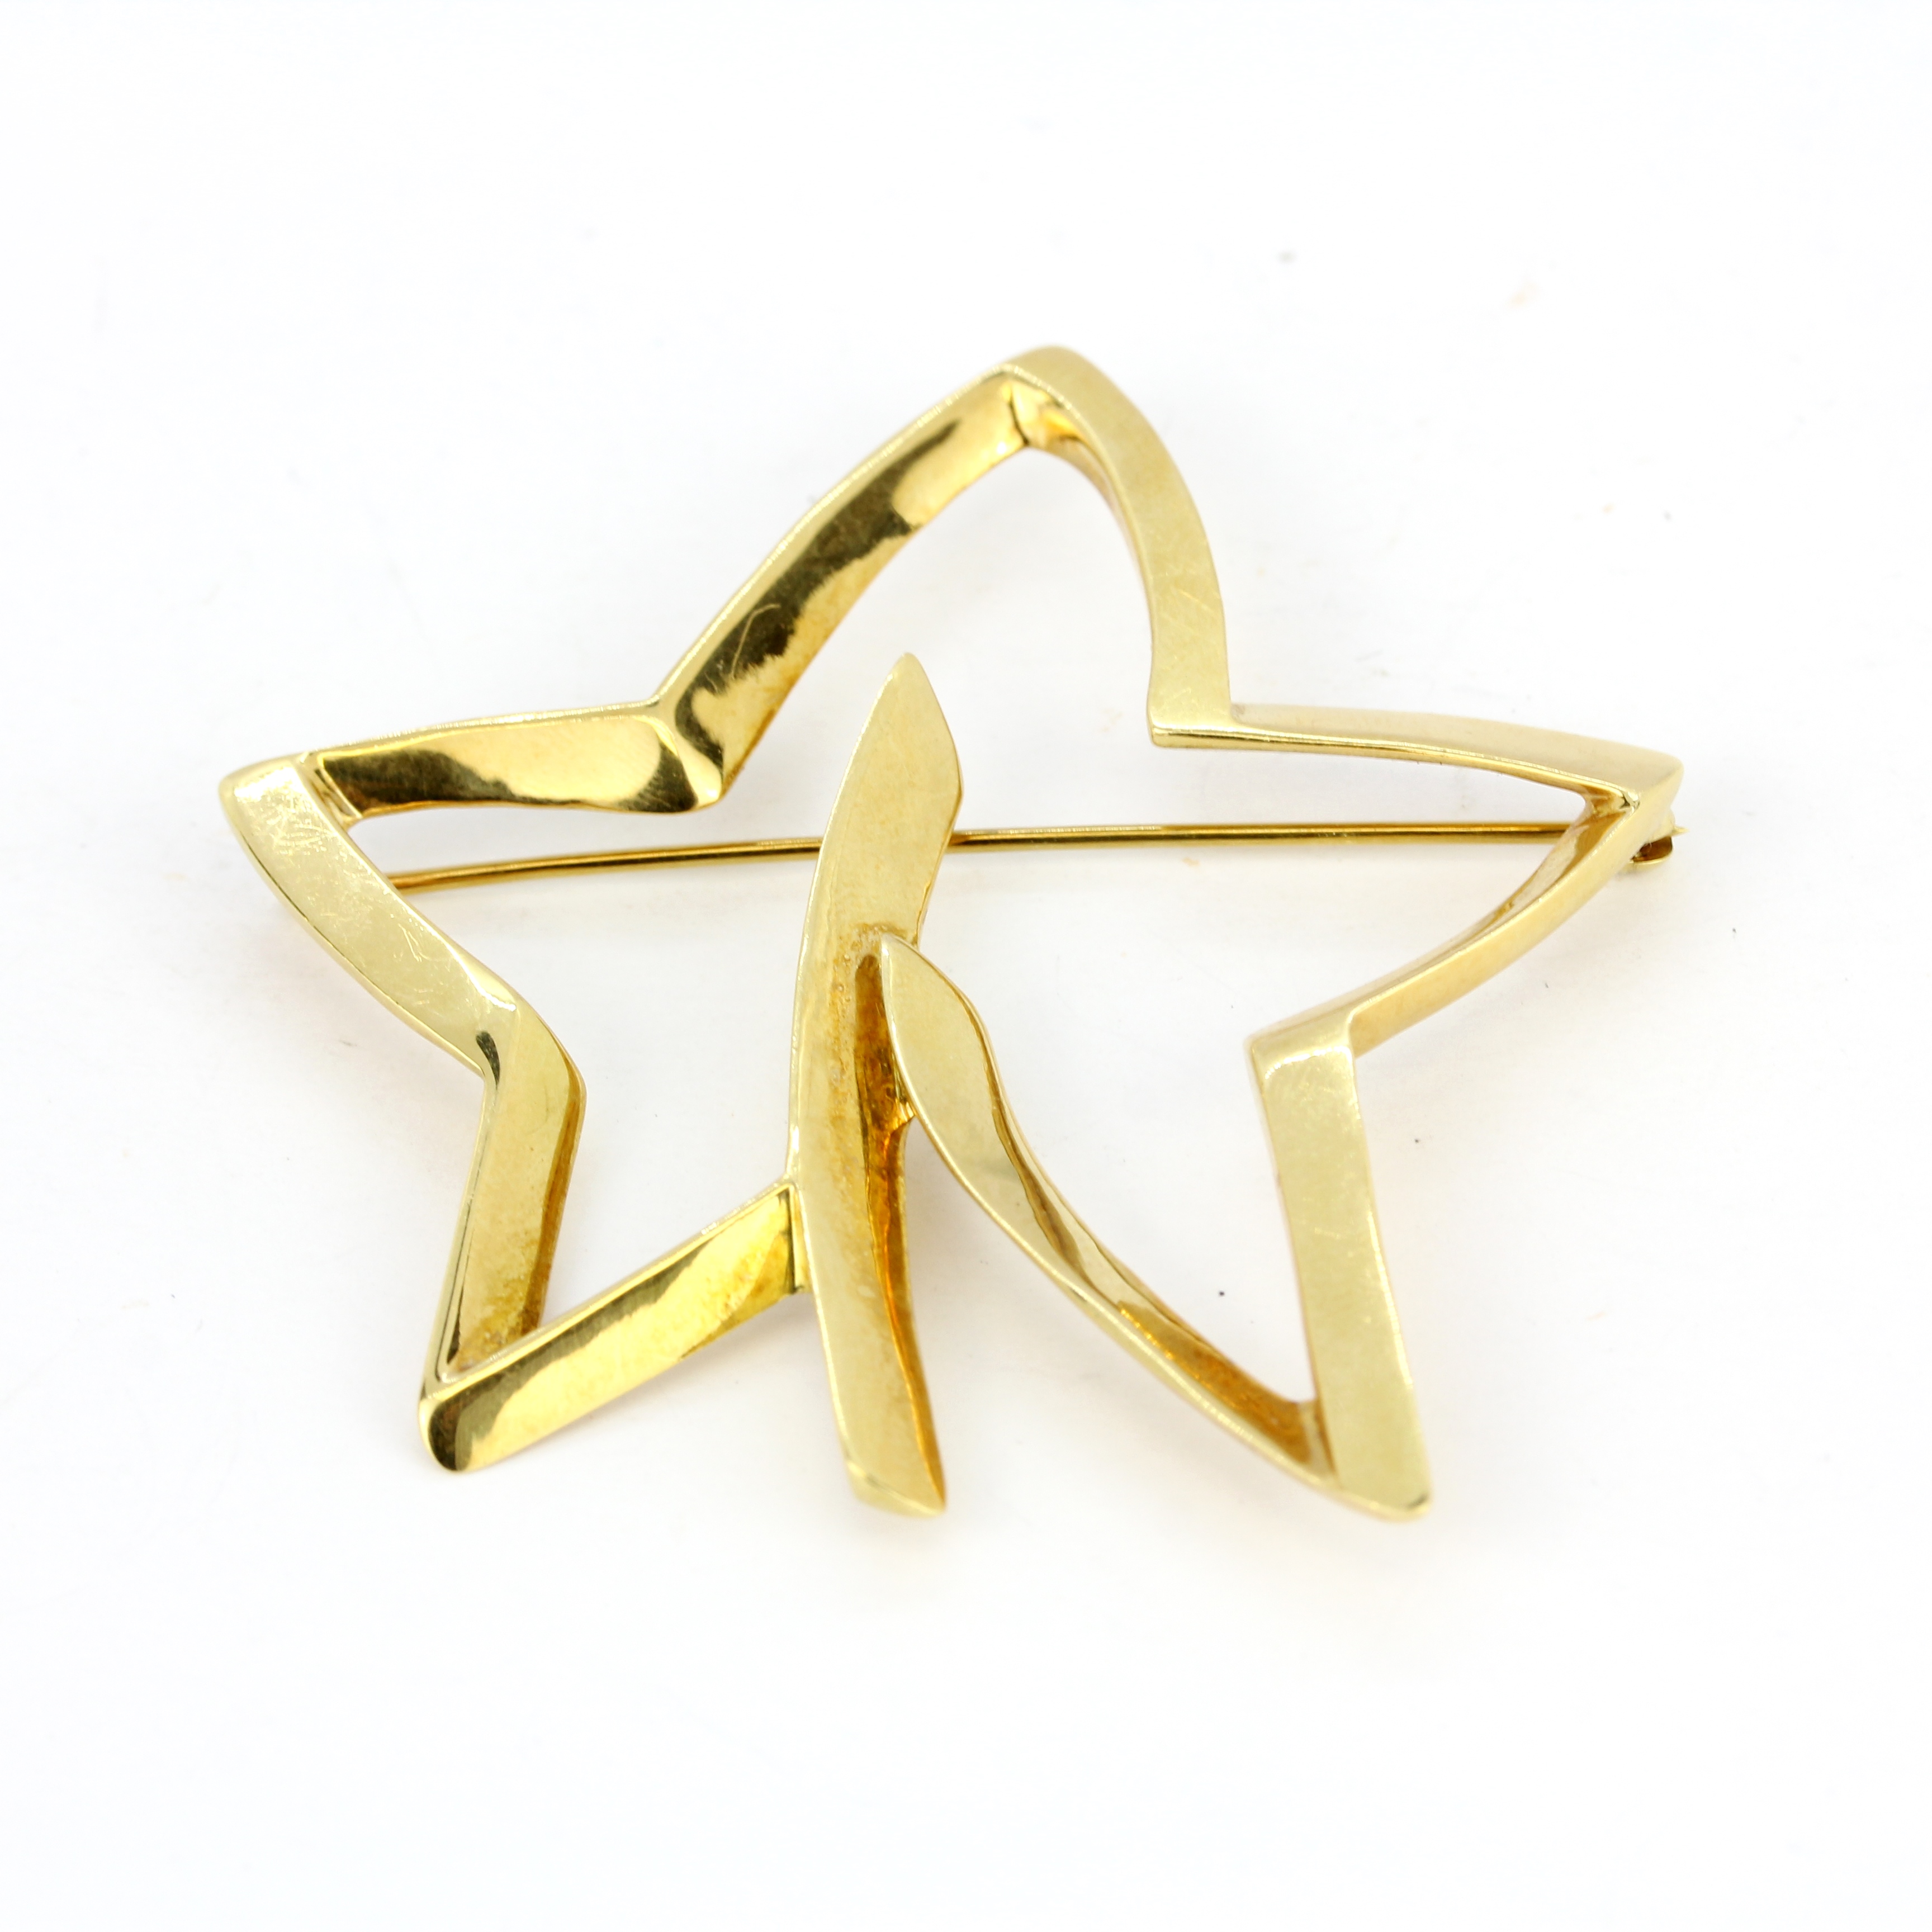 An 18ct yellow gold Tiffany & Co star shaped brooch, L. 5.2cm.